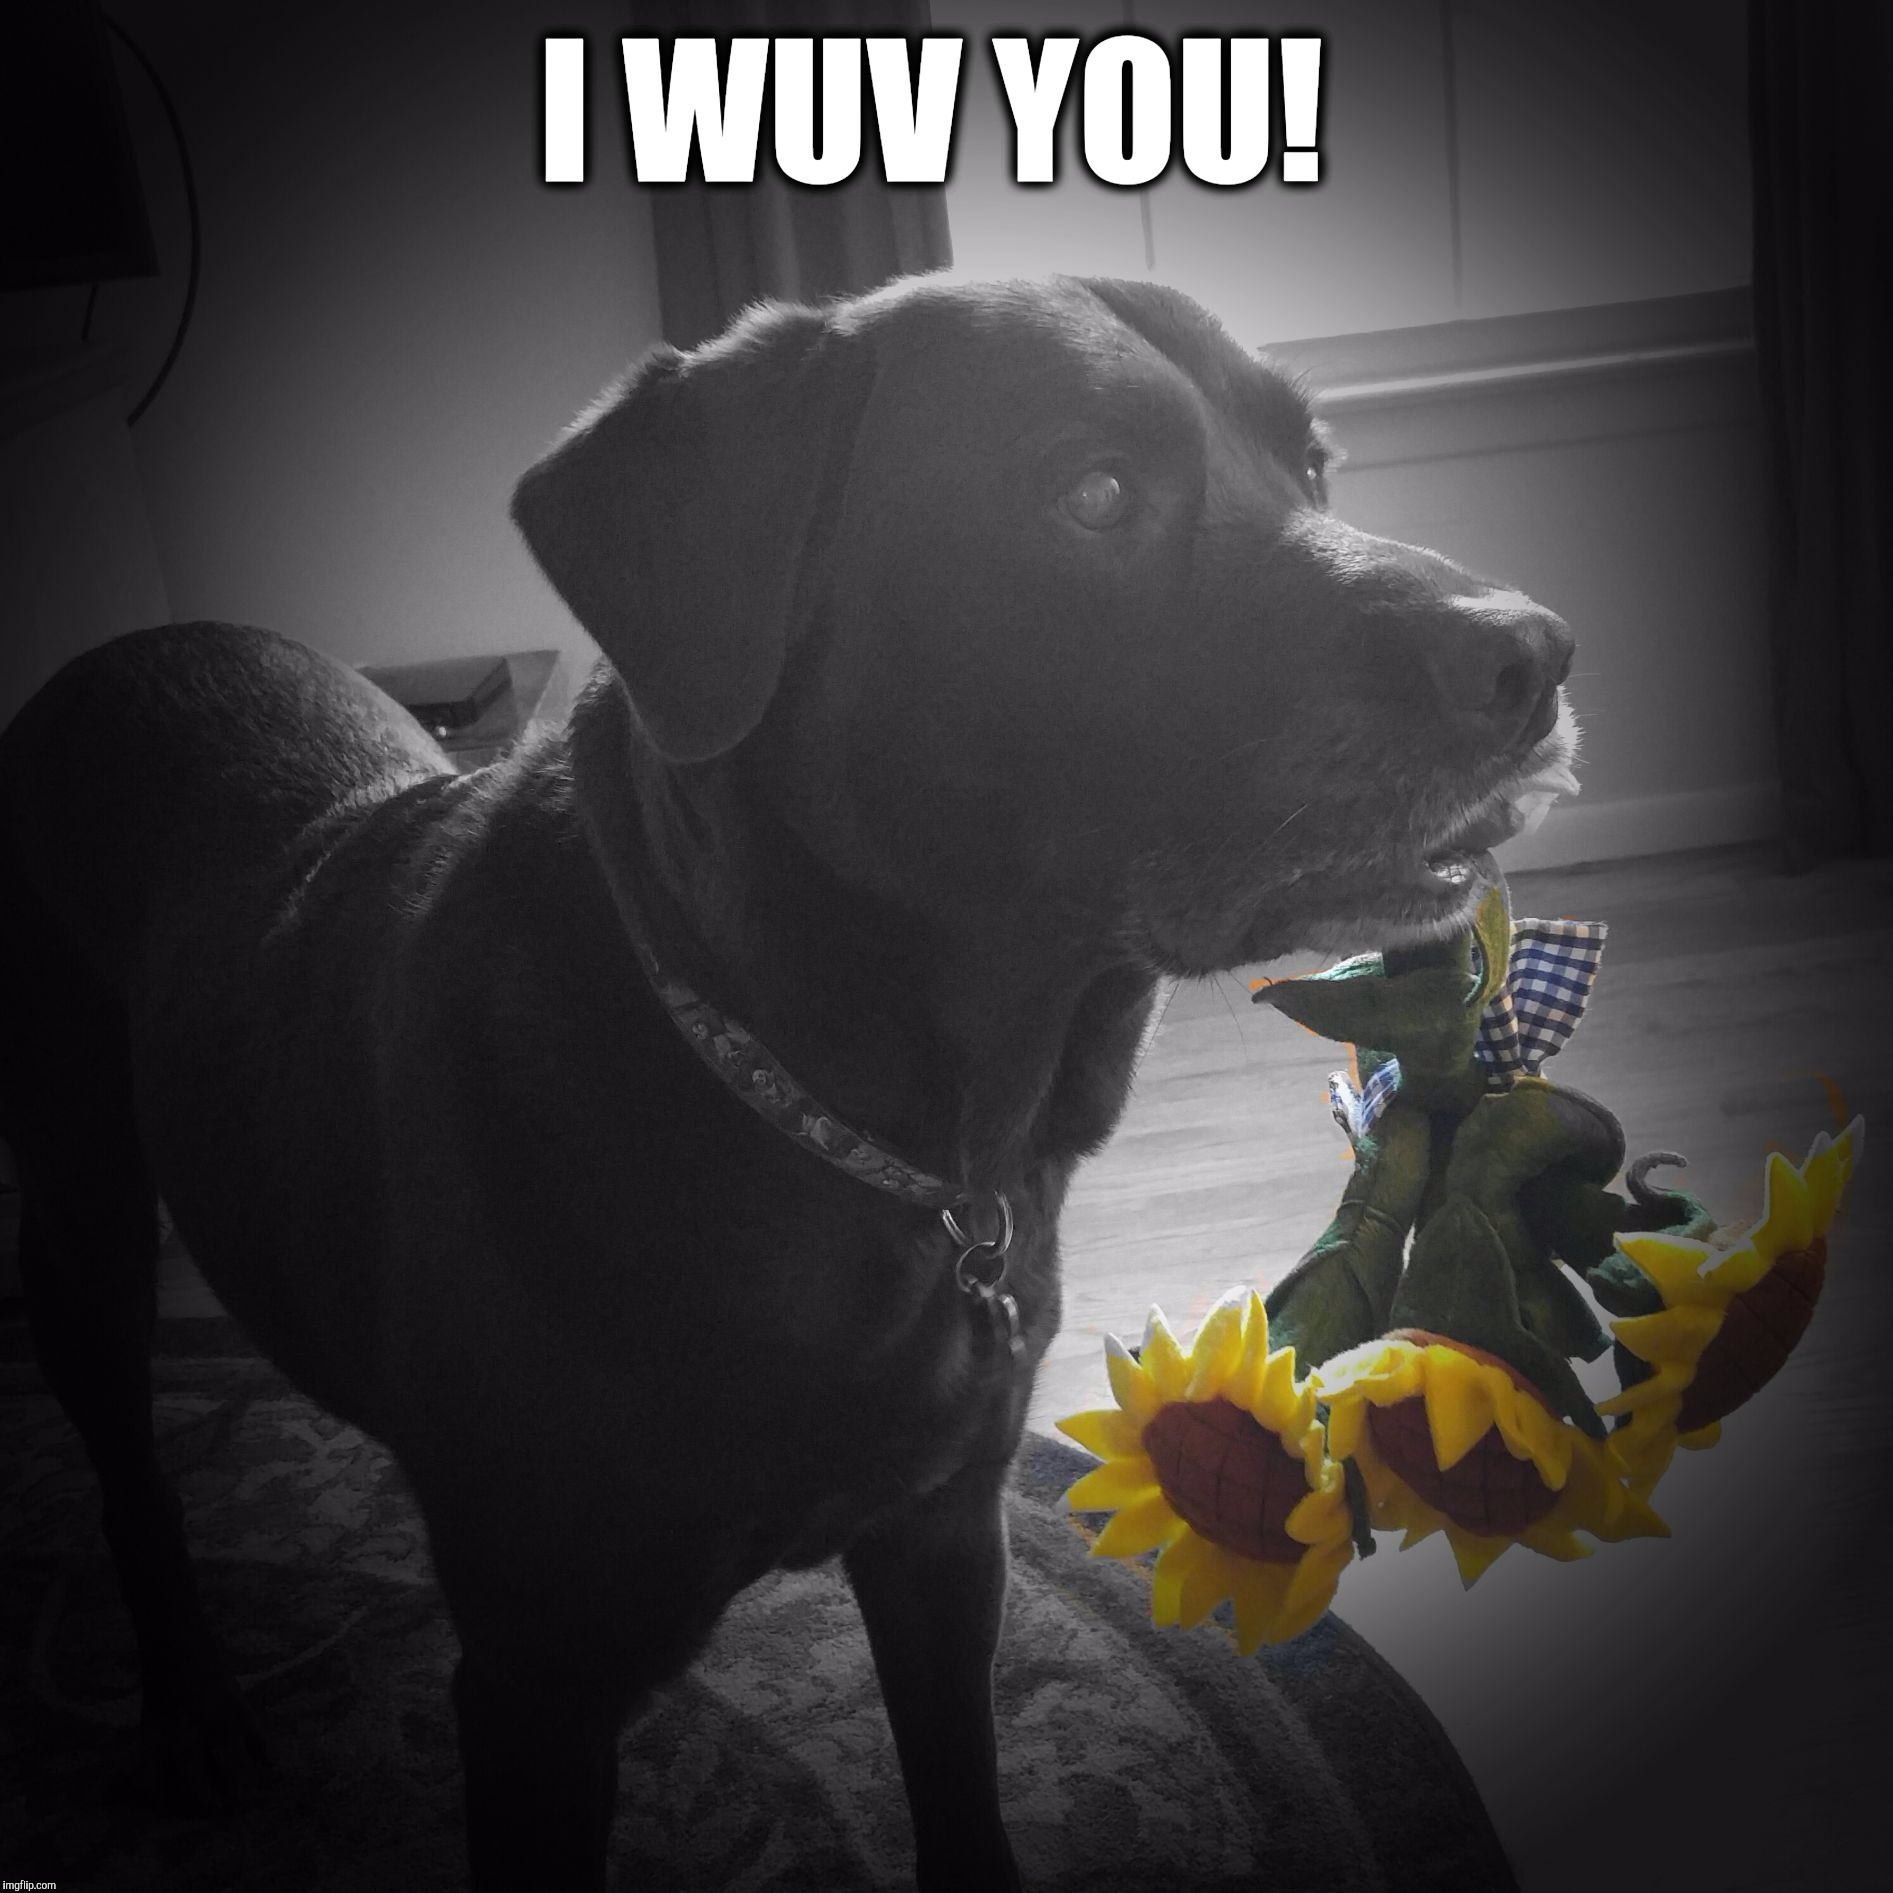 I love you!  | I WUV YOU! | image tagged in chuckie the chocolate lab,flowers,dog,cute dog,love,labrador | made w/ Imgflip meme maker